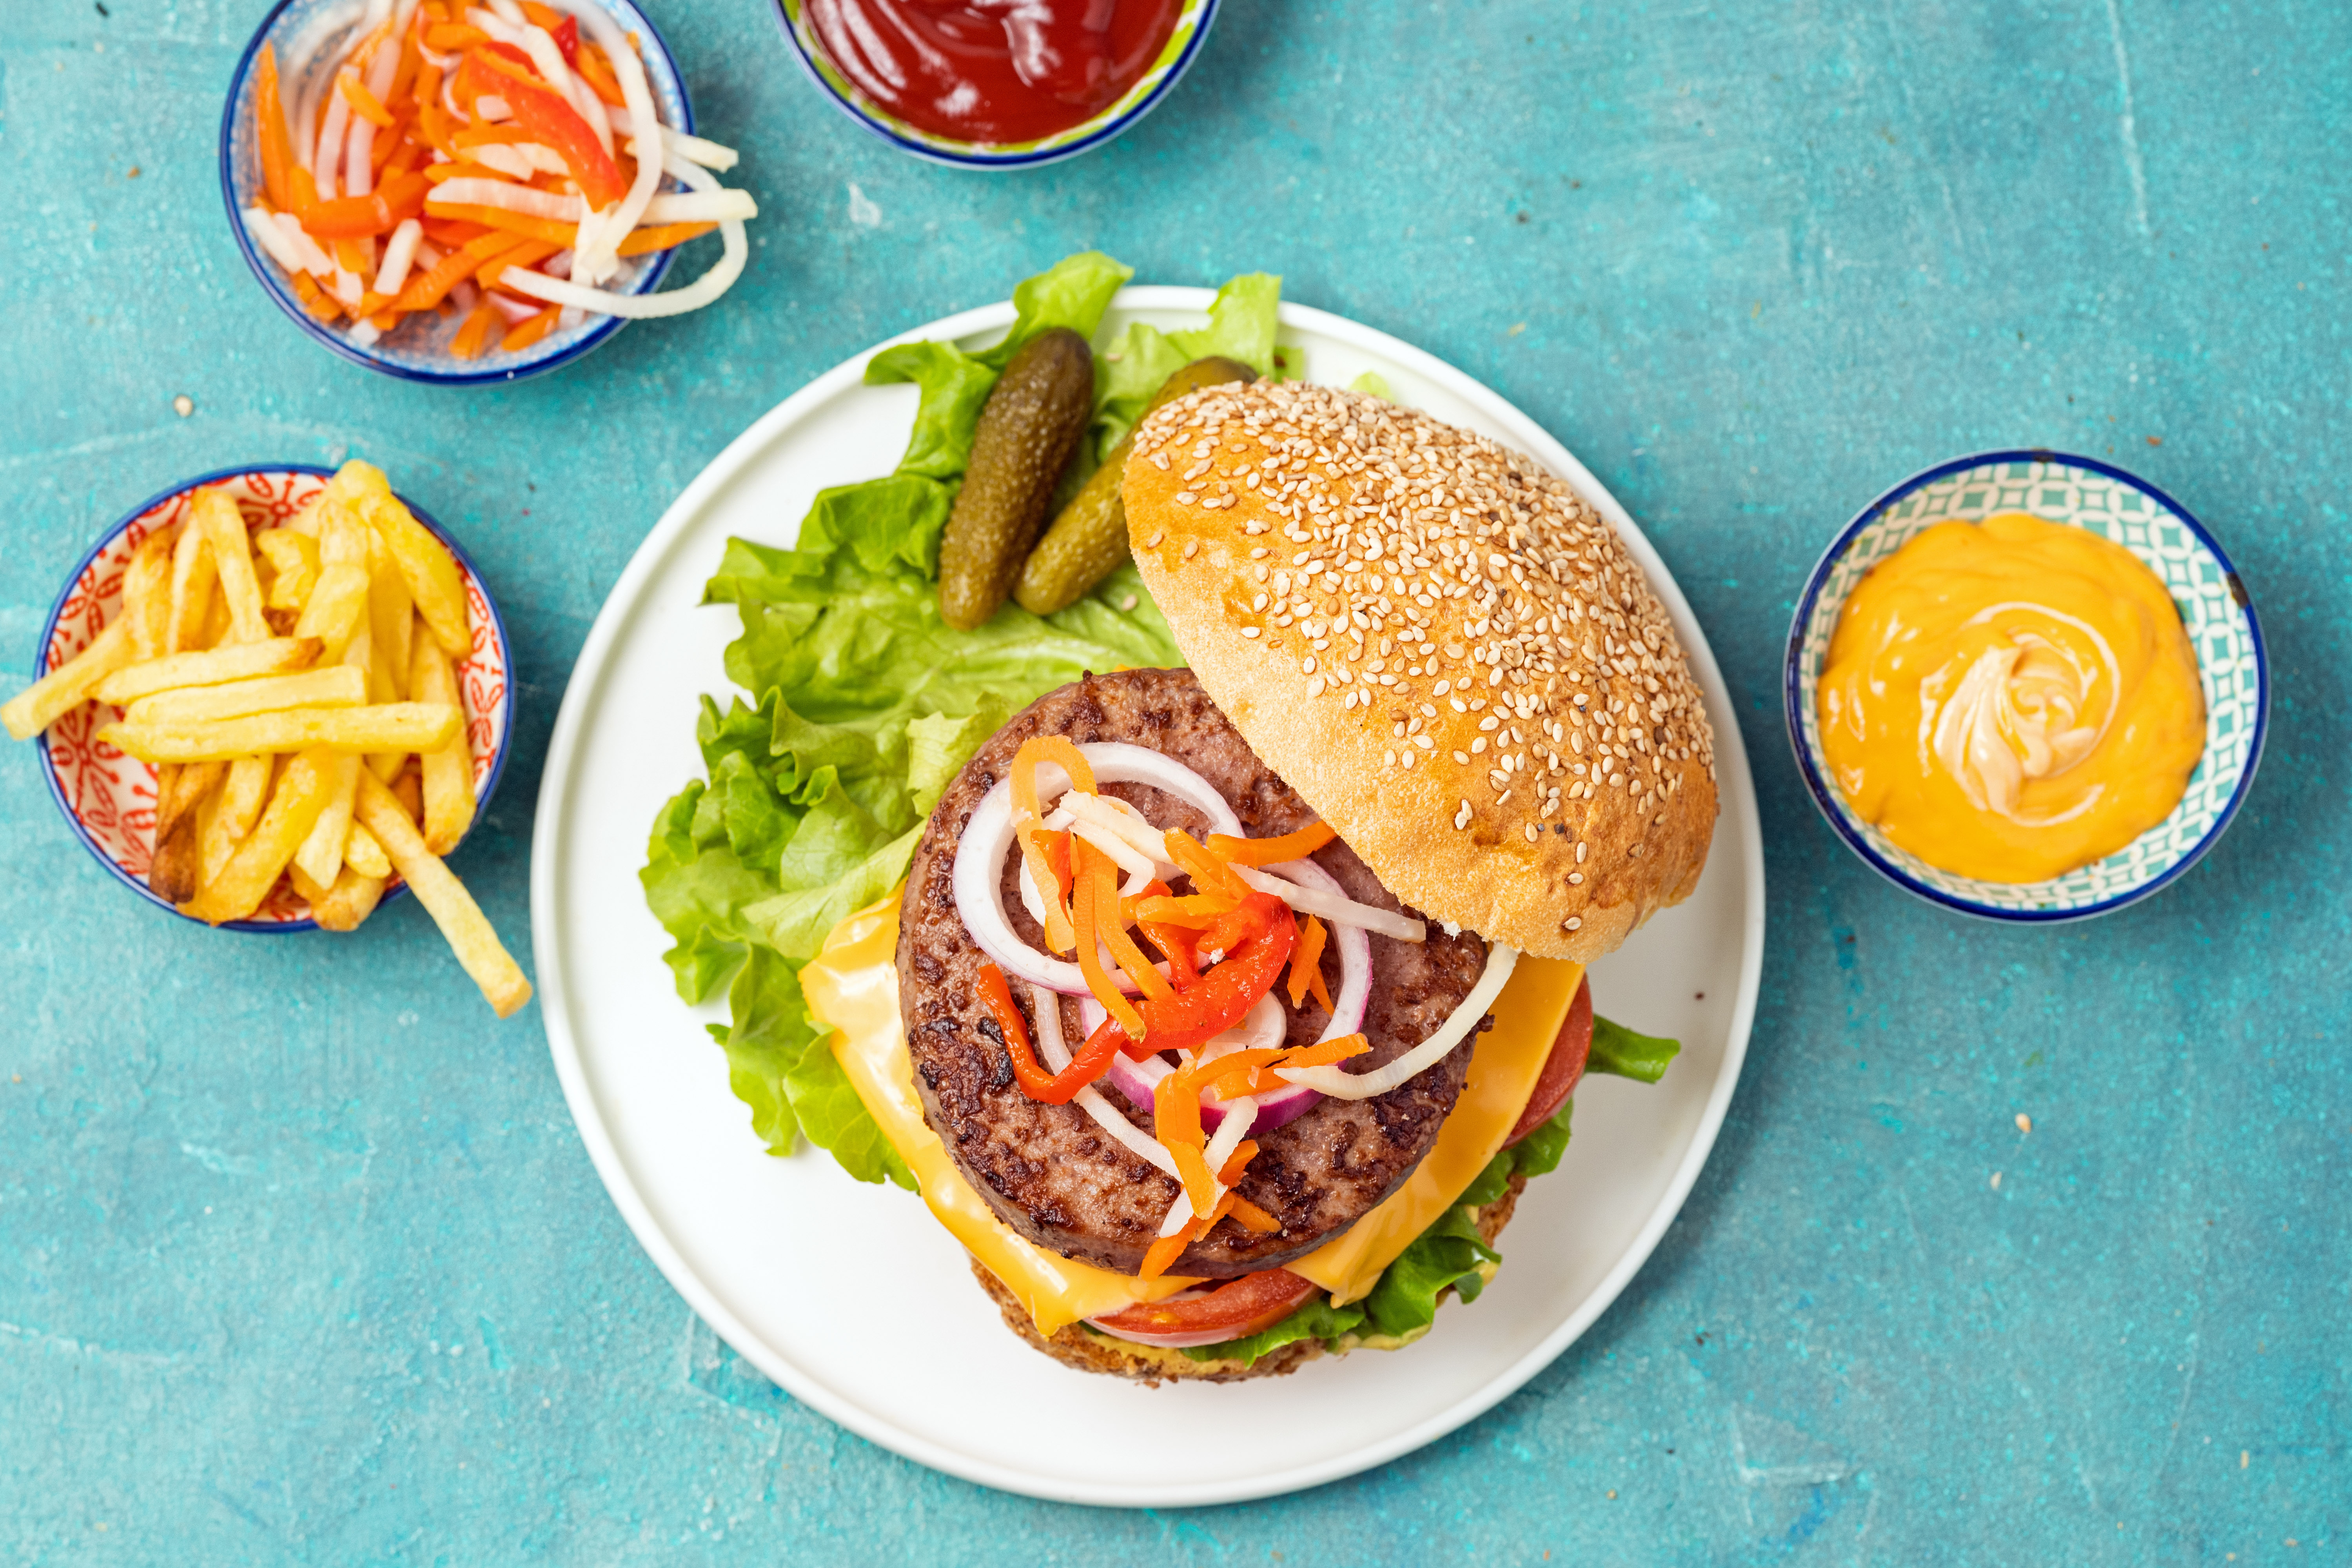 An open faced burger on a round white plate topped with onions, lettuce, cheese, and tomato with small bowls of condiments and a bowl of fries on the side with with a blue background.